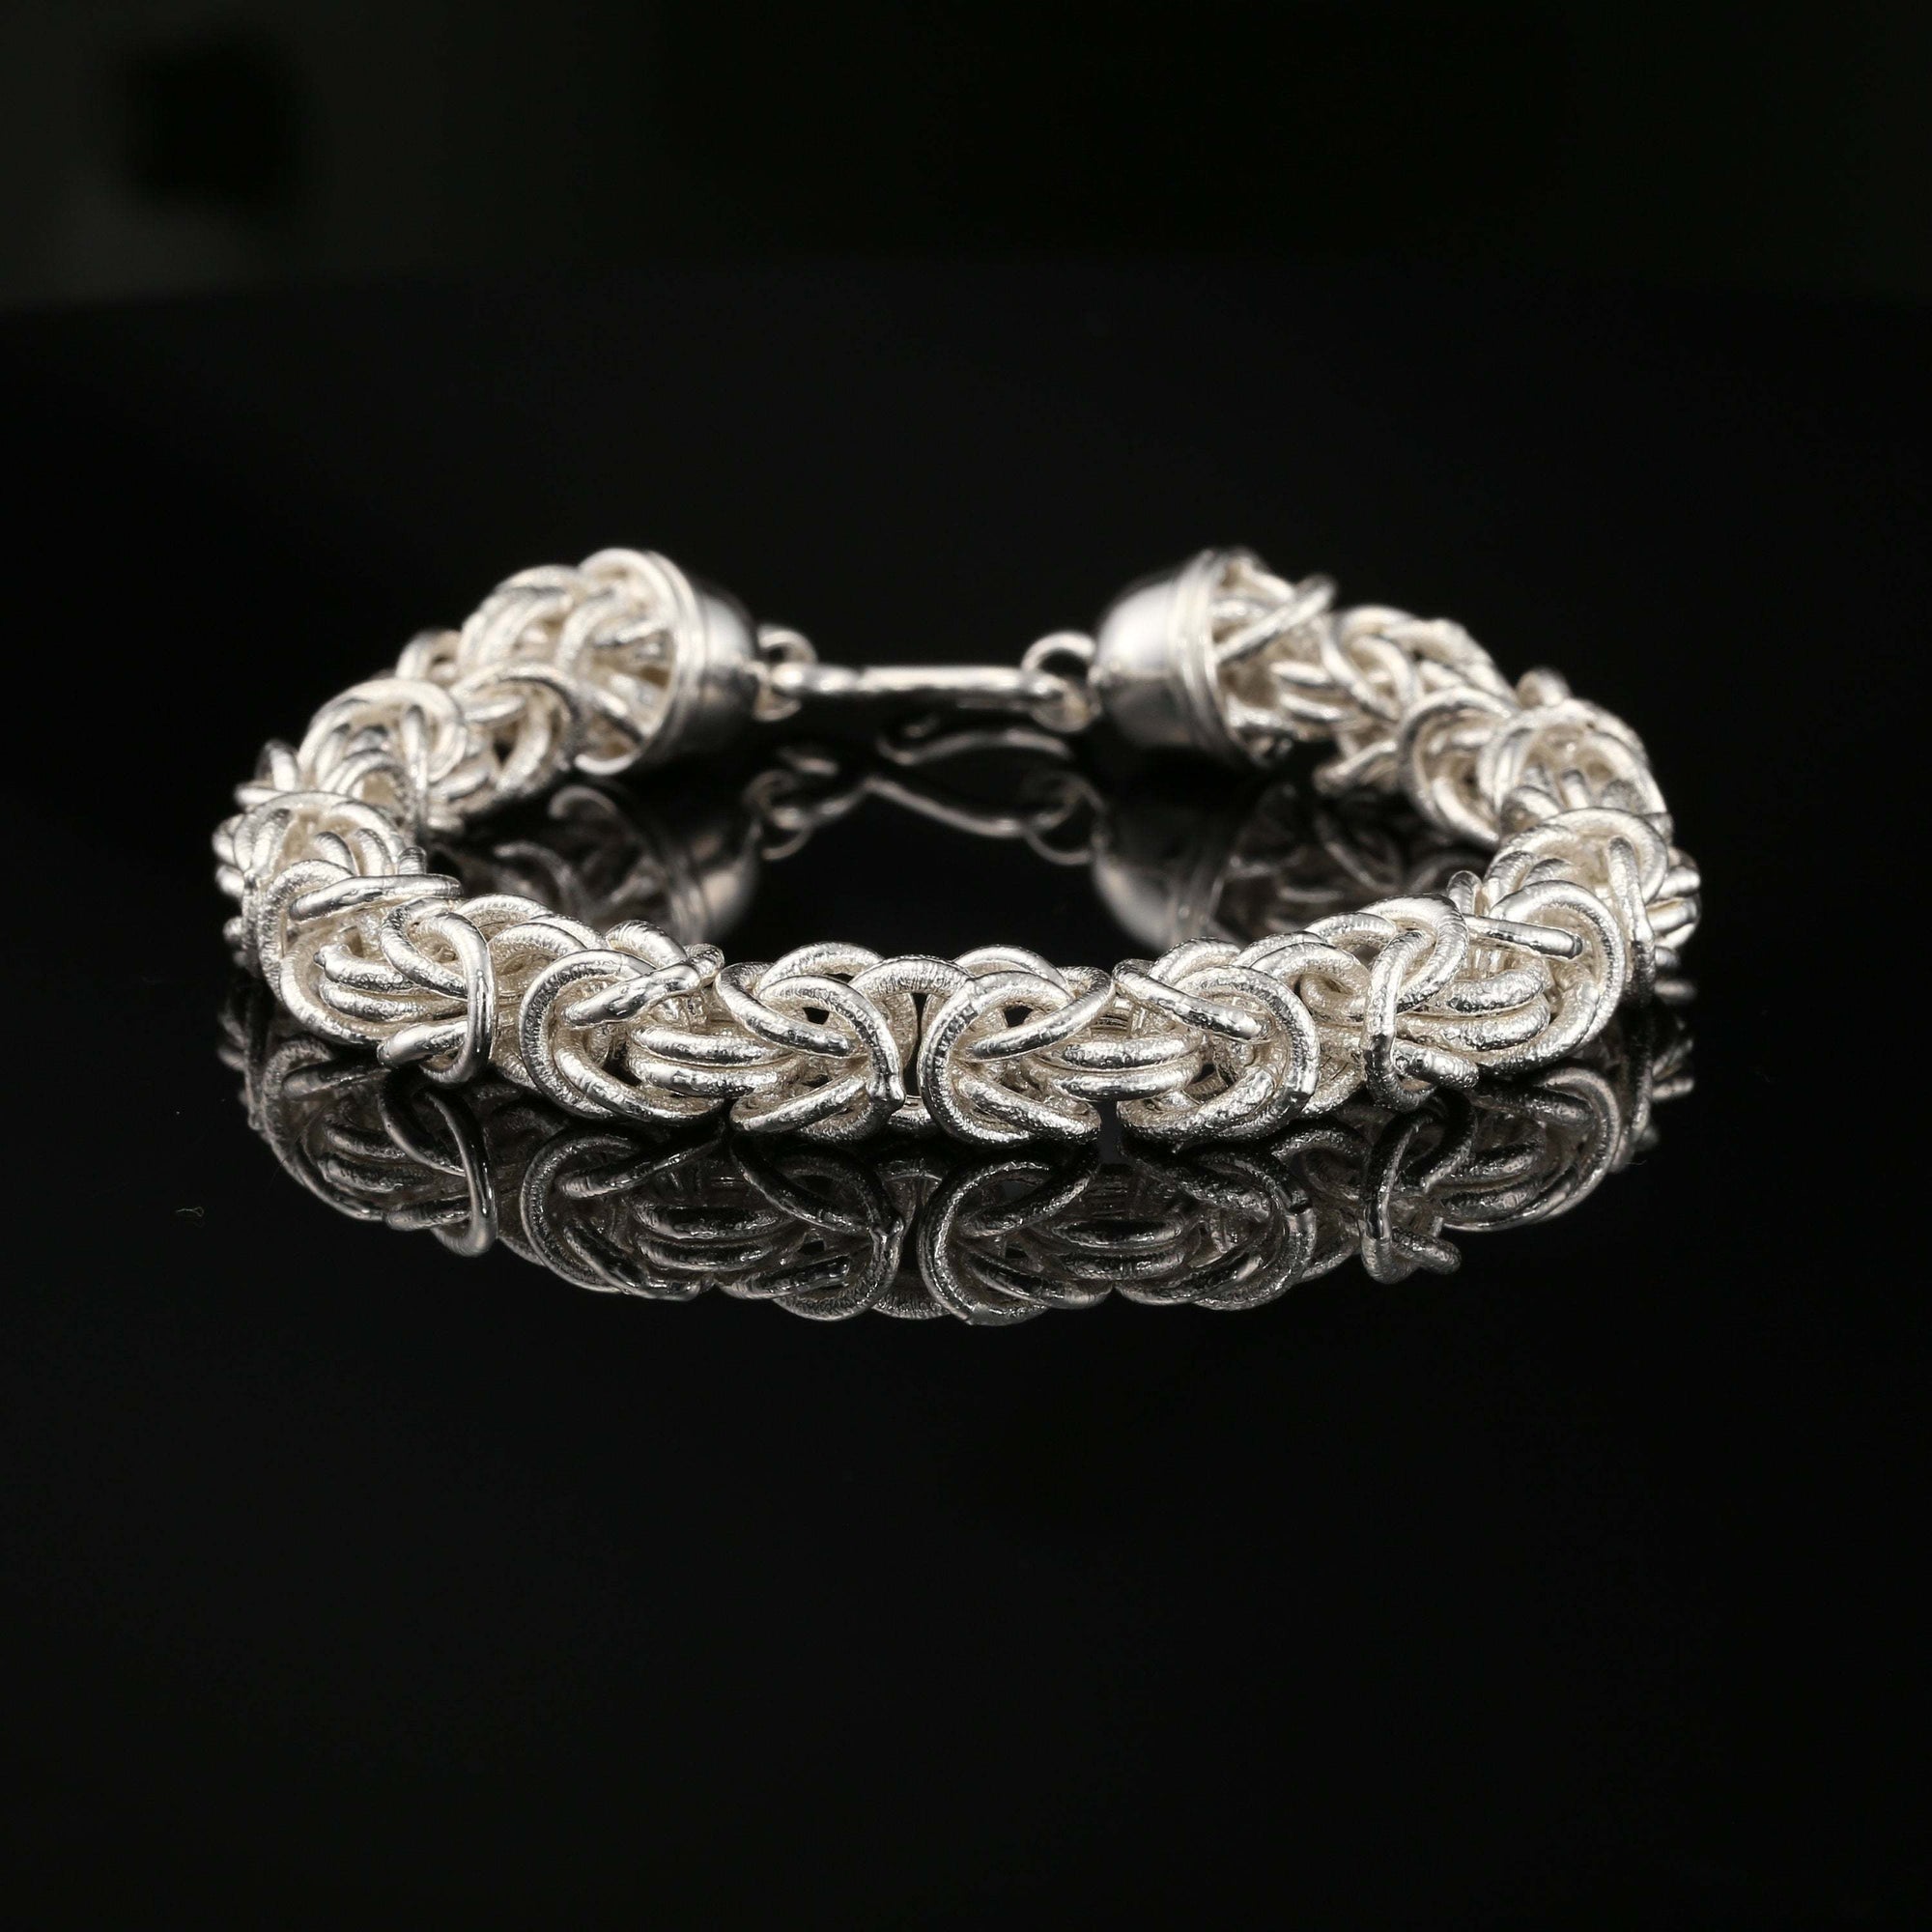 Handmade Byzantine Chain Bracelet with S-Hook Clasp, Matte, 8.5&amp;quot;, Unisex in Sterling Silver